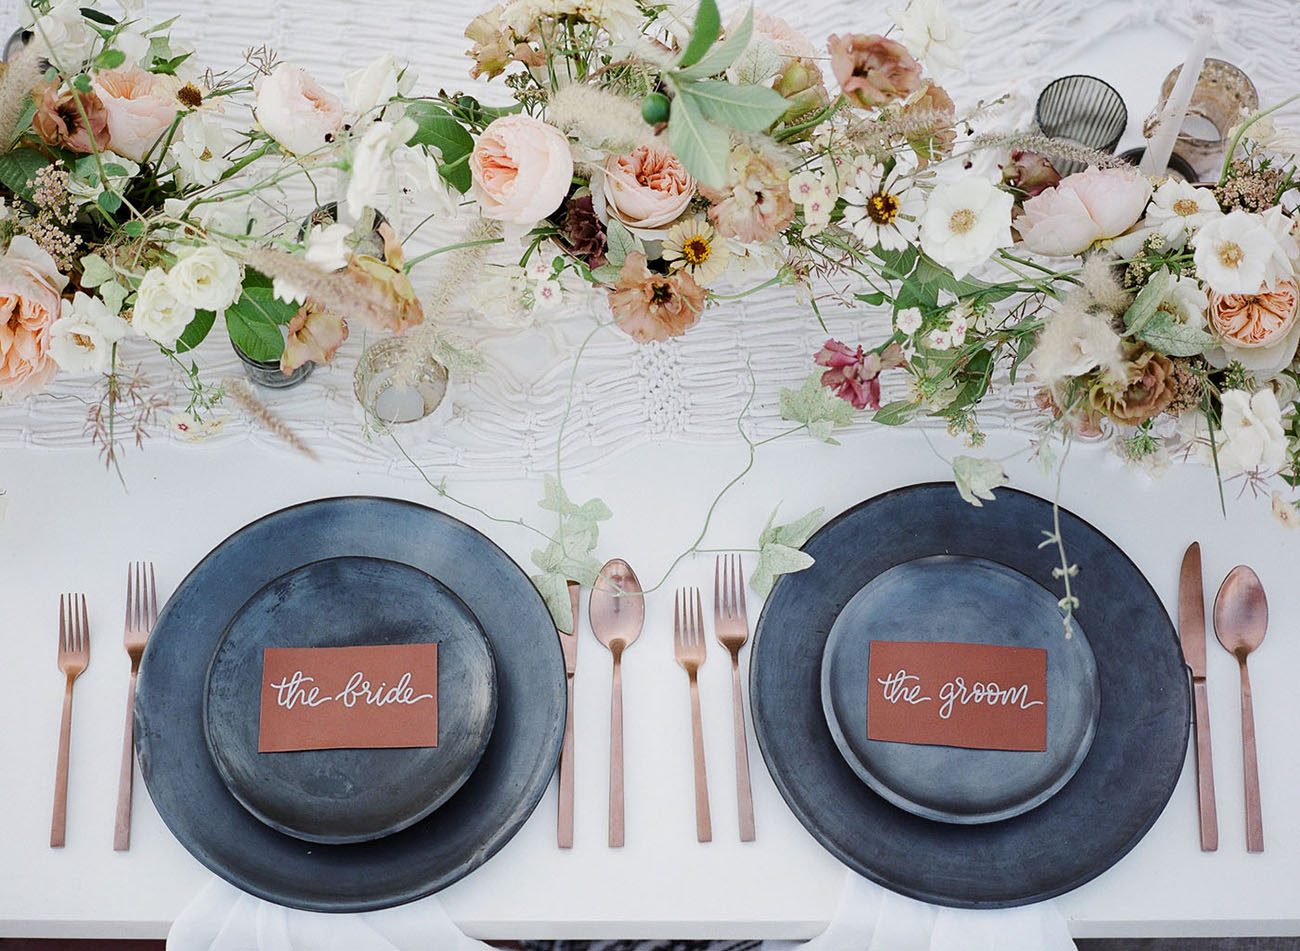 The reception table was done with matte grey plates and chargers, delicate blooms, copper cutlery